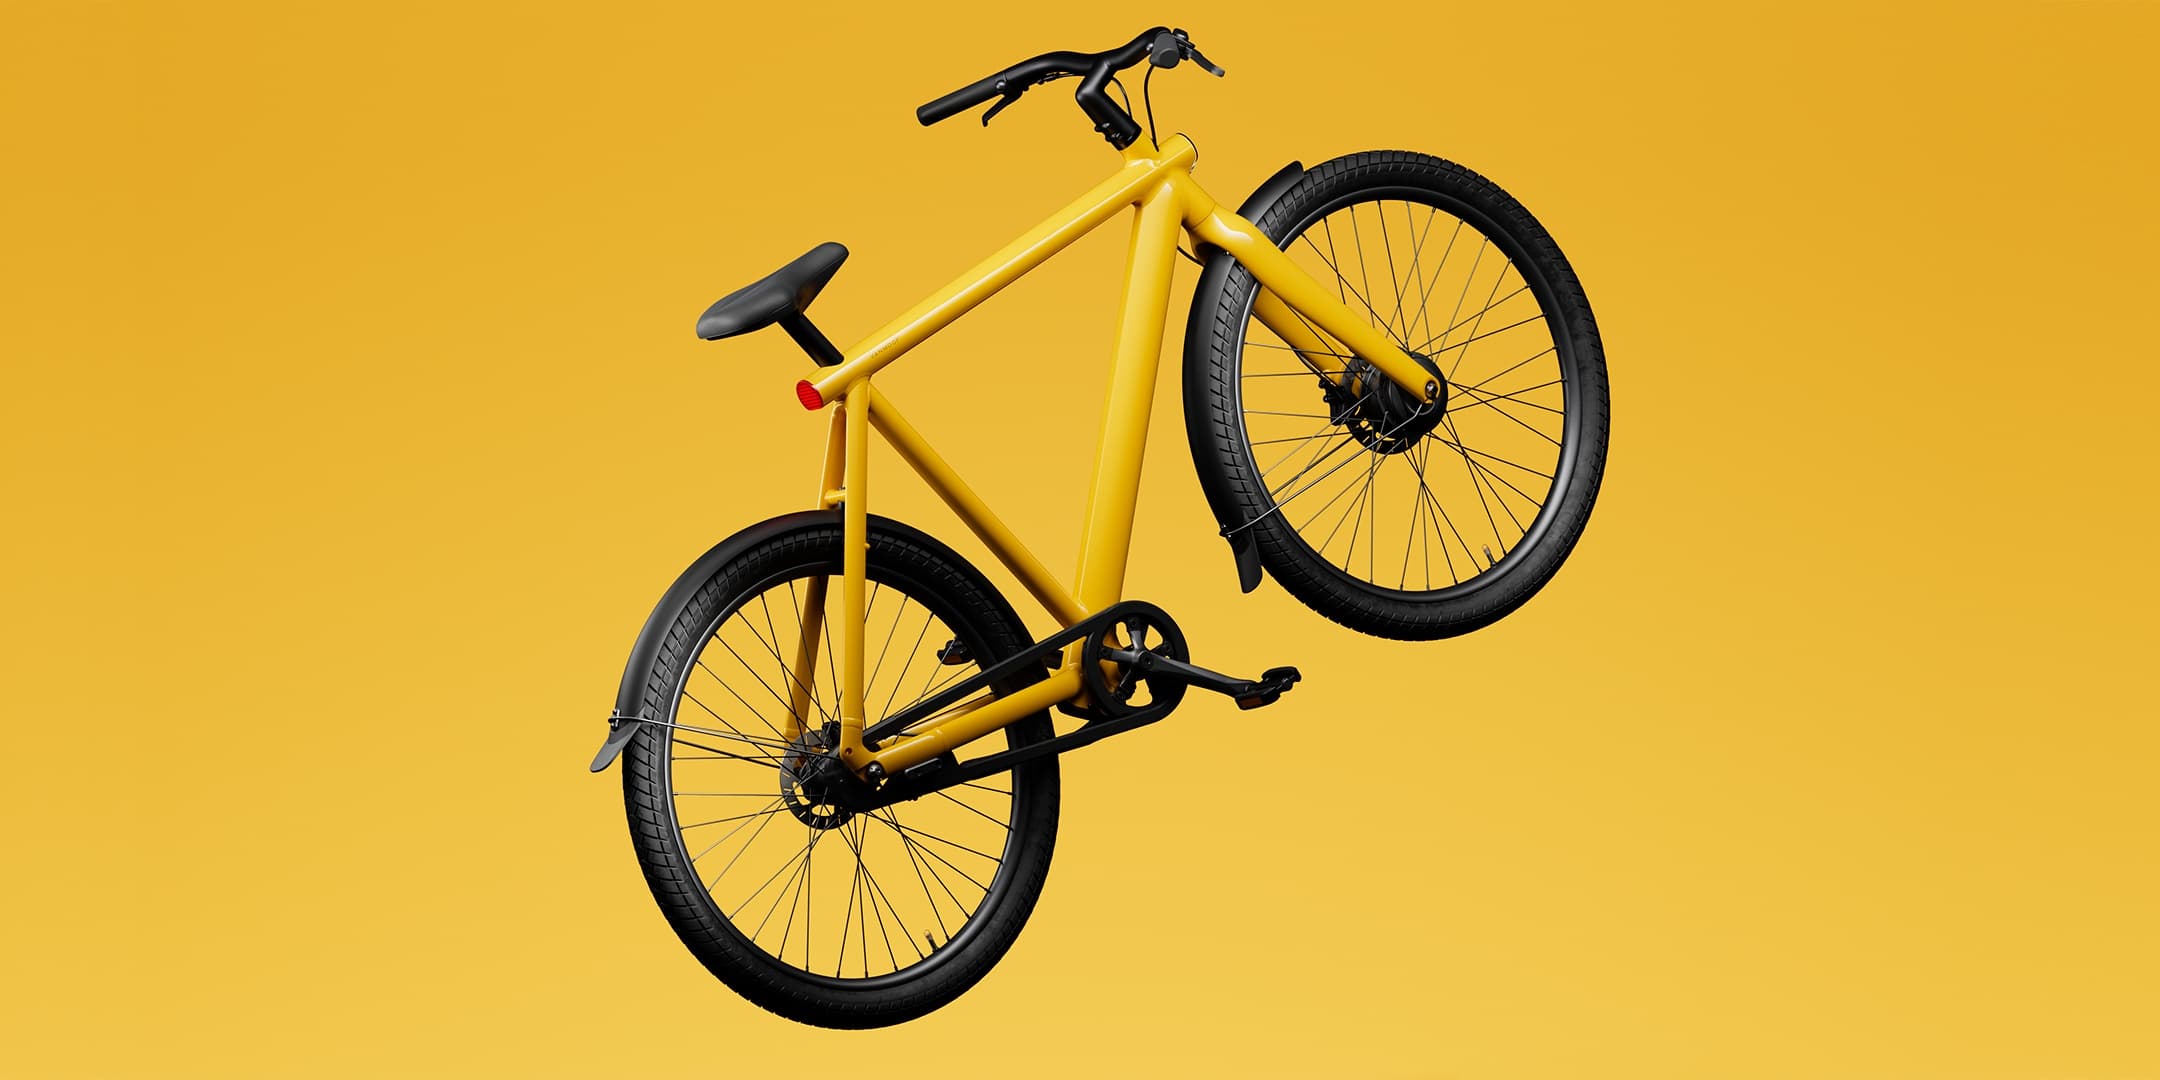 VanMoof shocks industry, temporarily stopping sales of all e-bikes